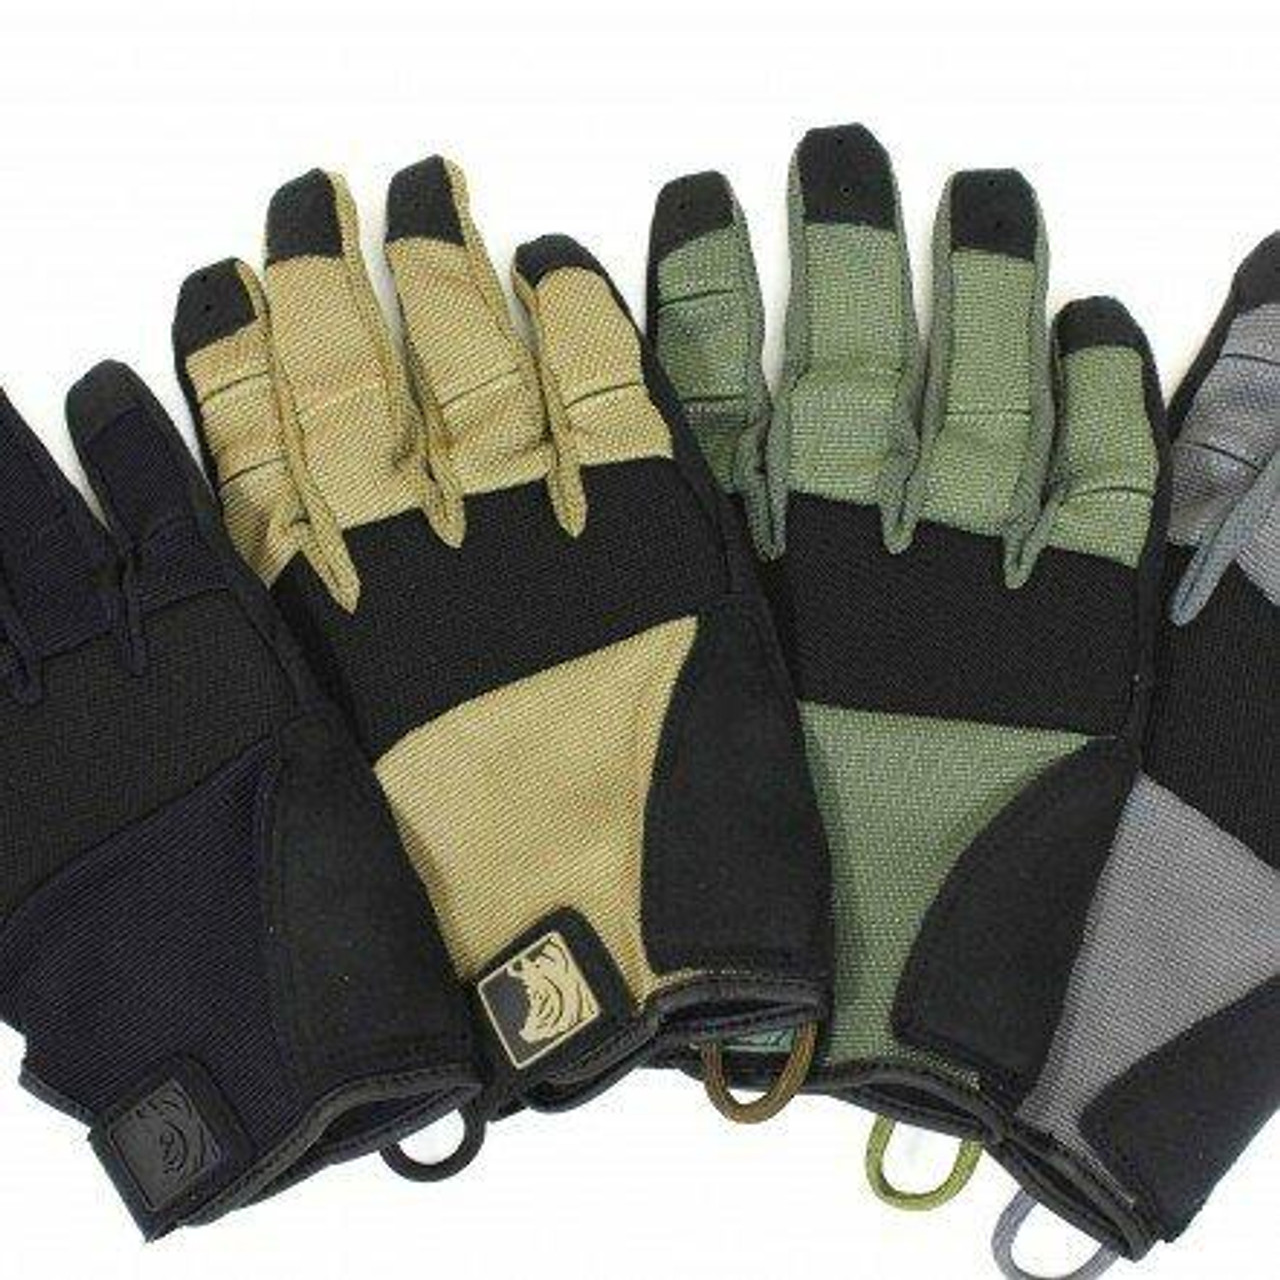 https://cdn11.bigcommerce.com/s-dbe3e/images/stencil/1280x1280/products/956/11845/pig-tactical-eod-gloves__65754.1639941104.jpg?c=2